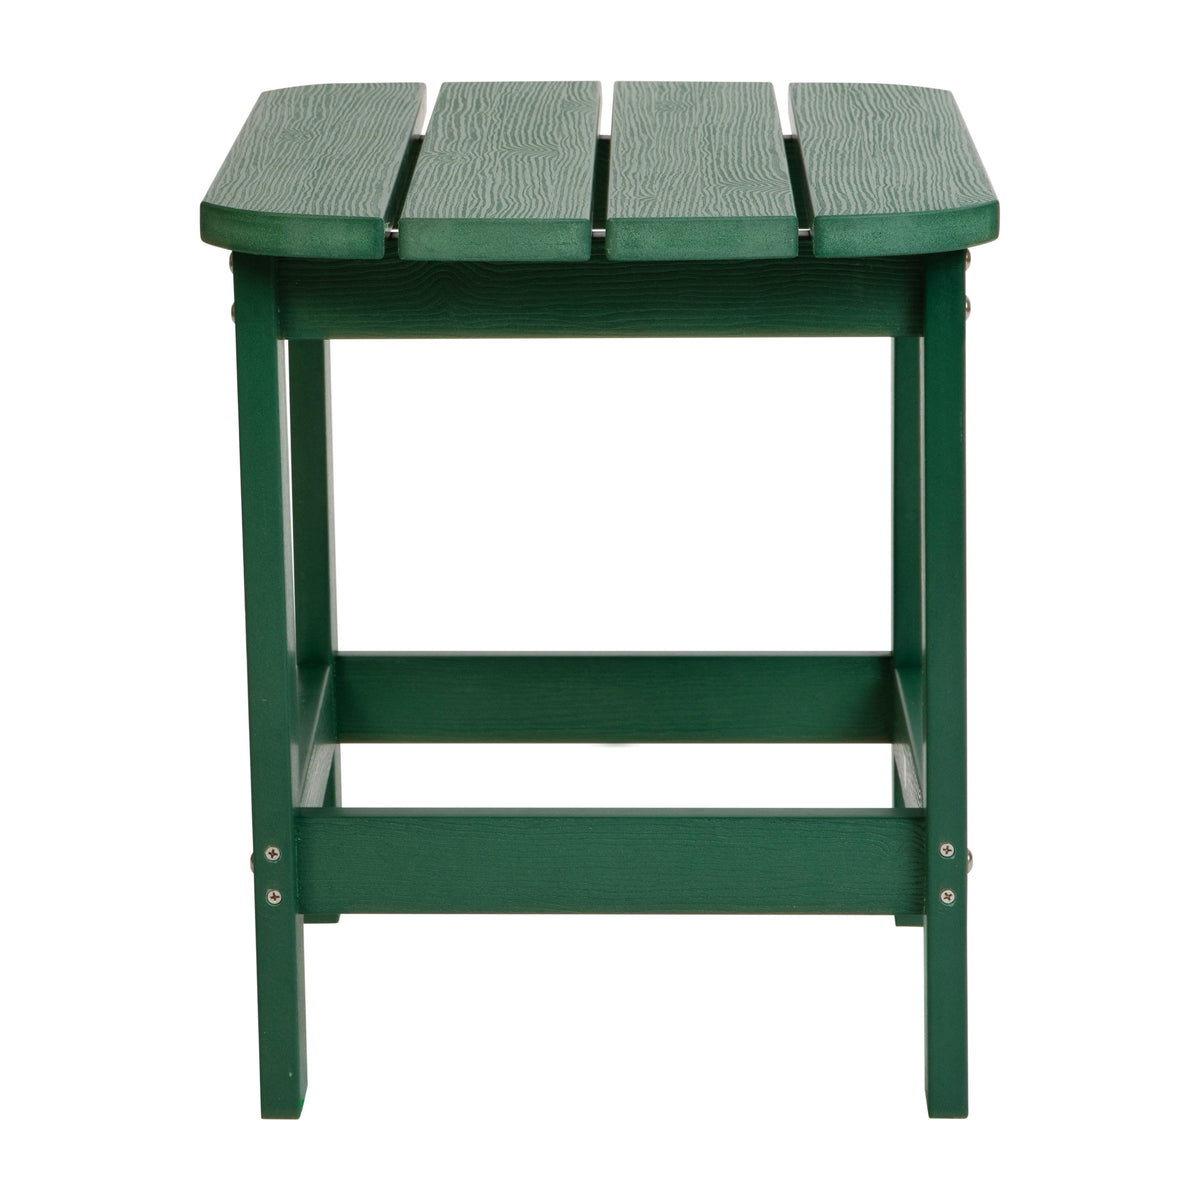 Green |#| All-Weather Poly Resin Adirondack Side Table in Green - Patio Table